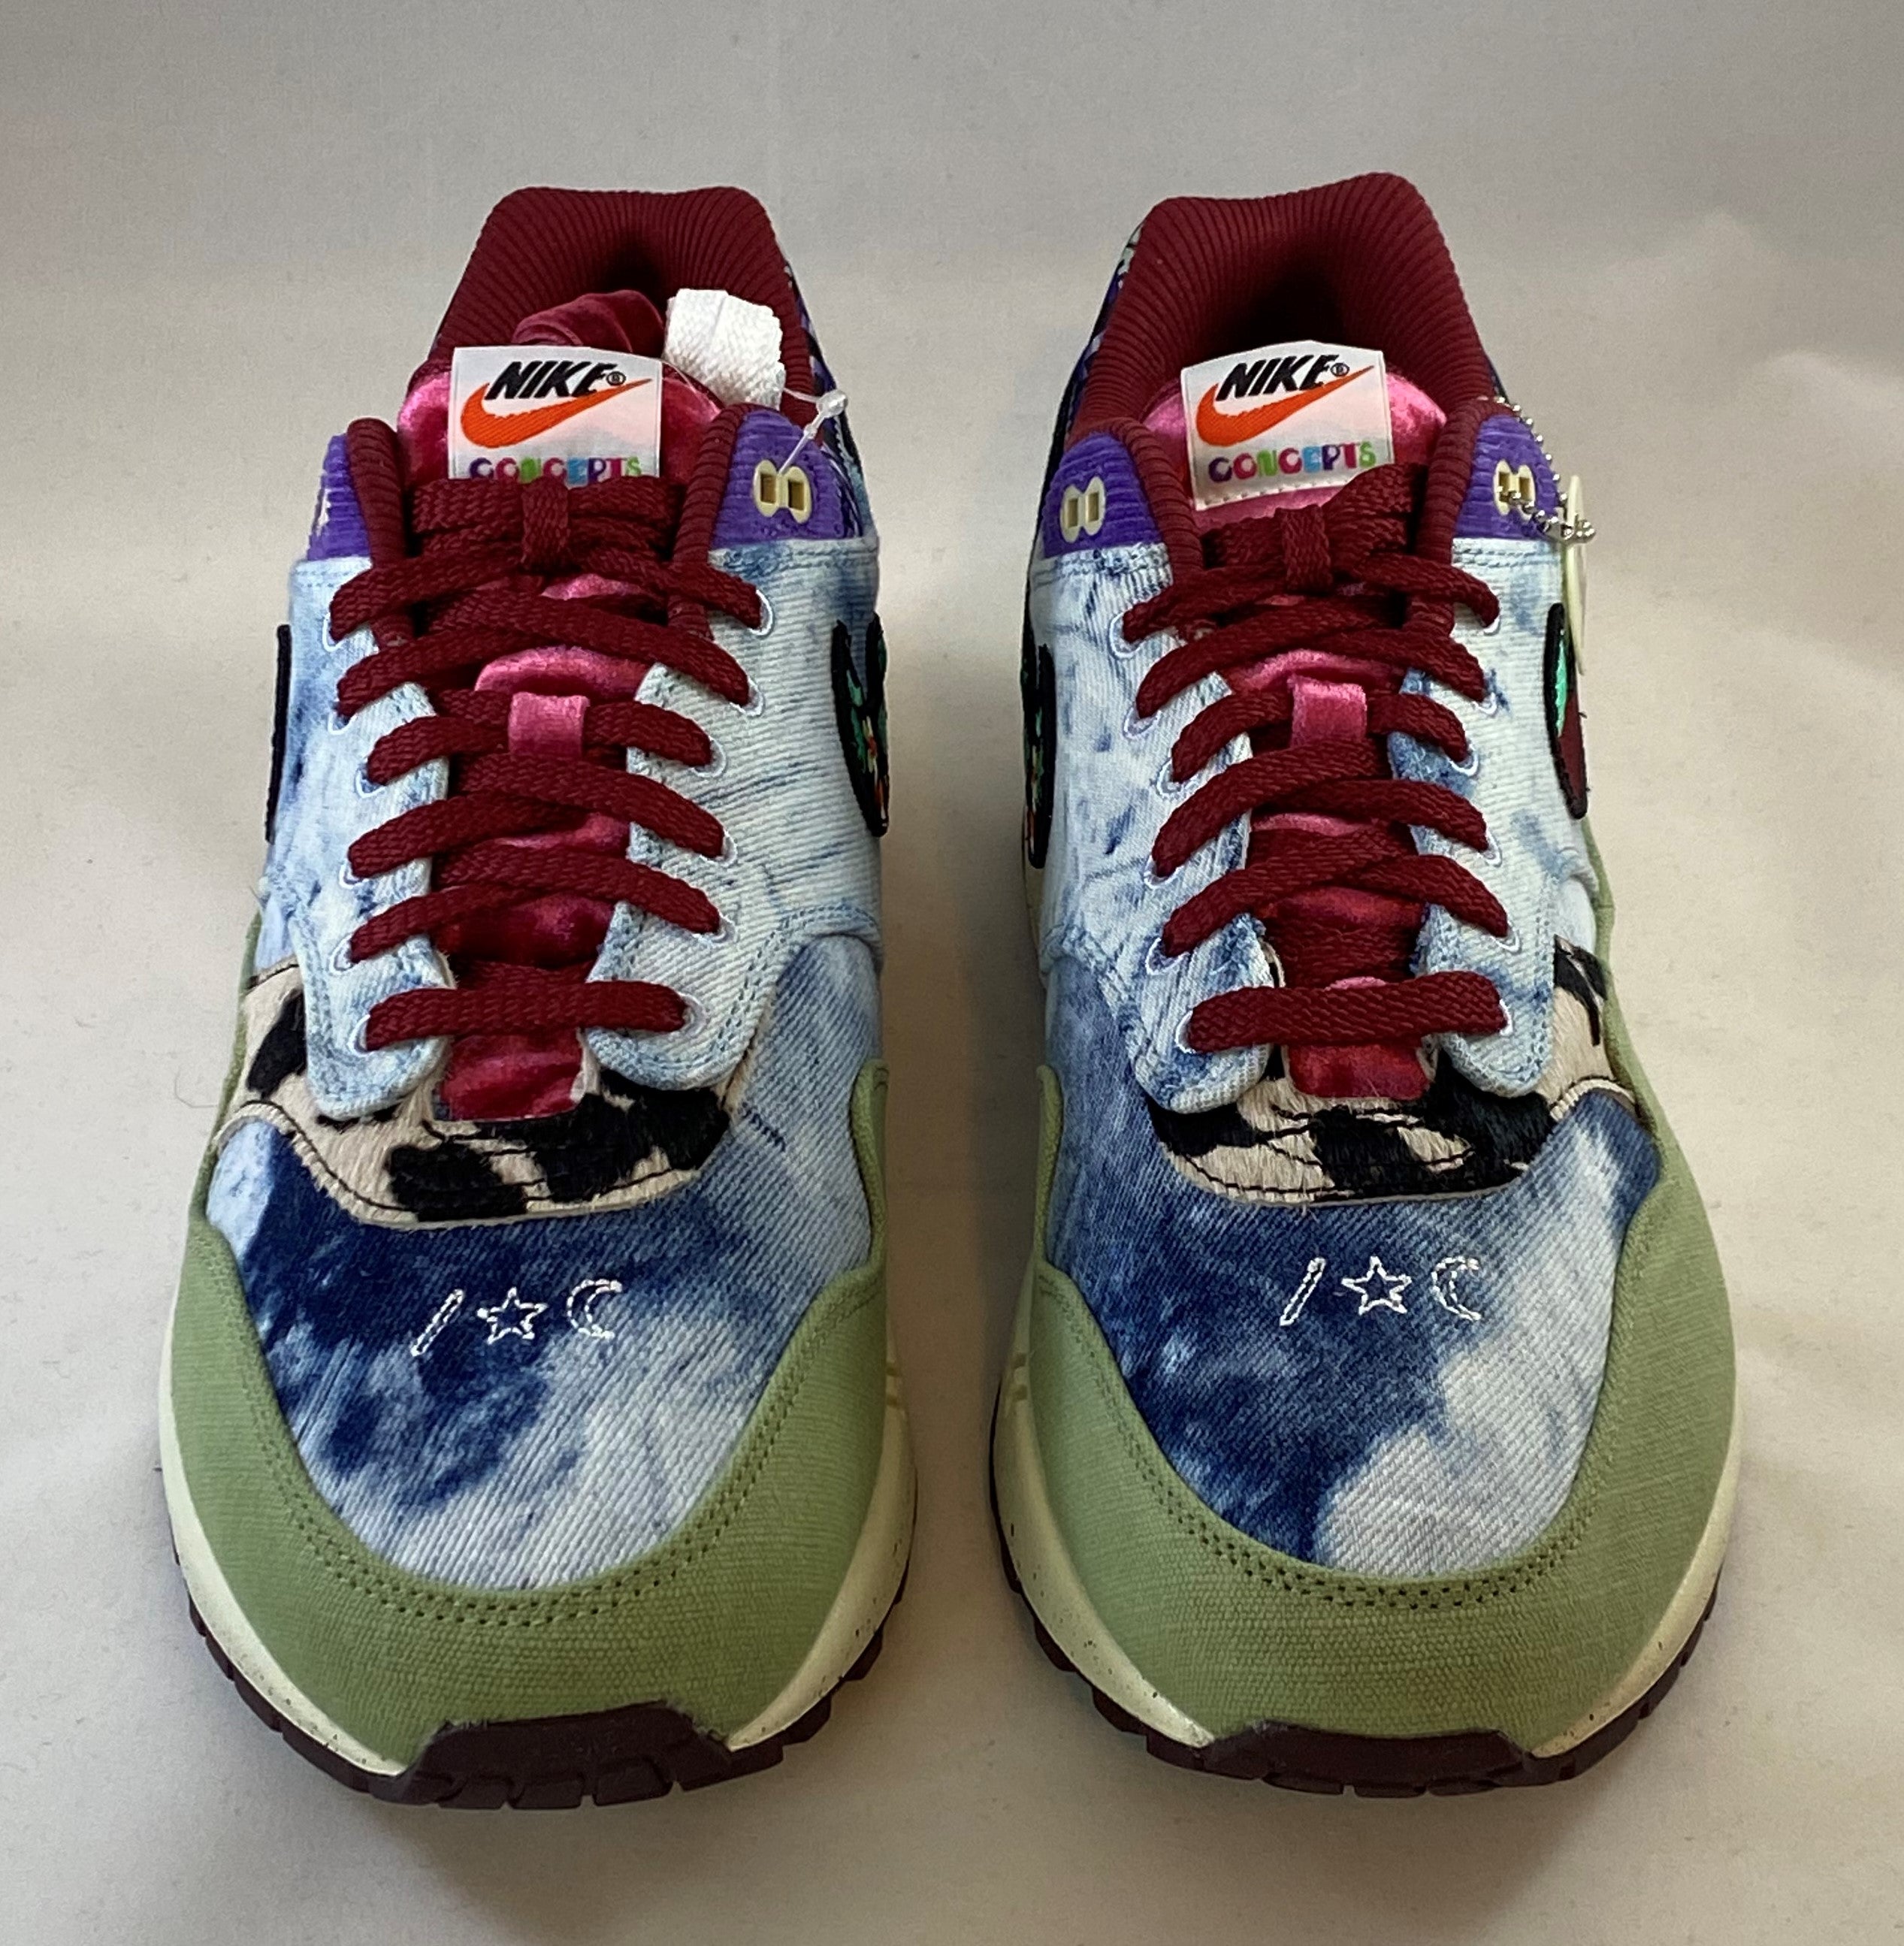 NIKE Air Max 1 SP x Concepts "Mellow" Men's Size 12 Blue Denim Casual Shoes New SidelineSwap